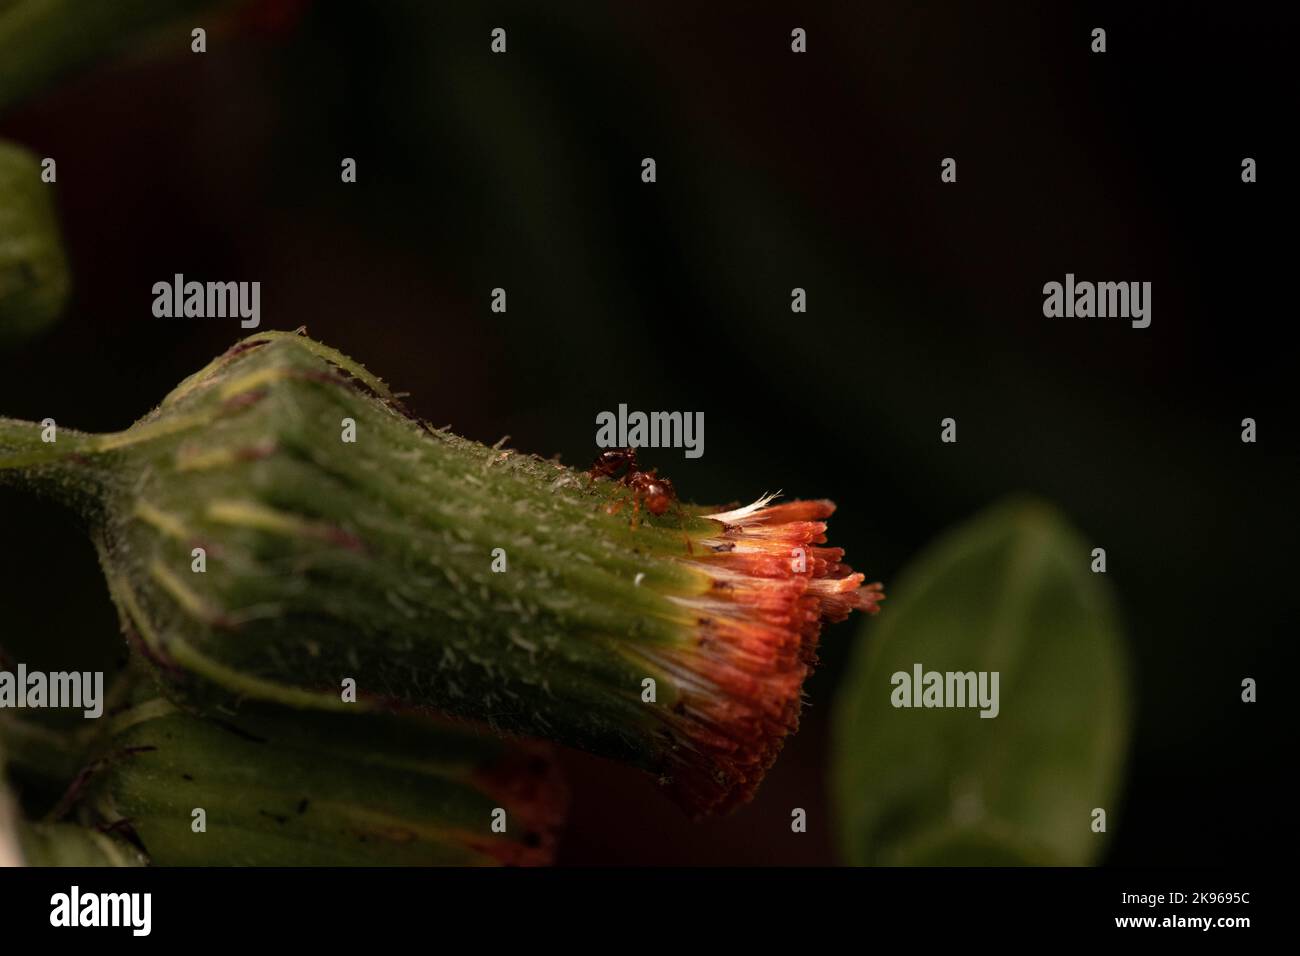 A closeup shot of a flower bud on blurry background Stock Photo